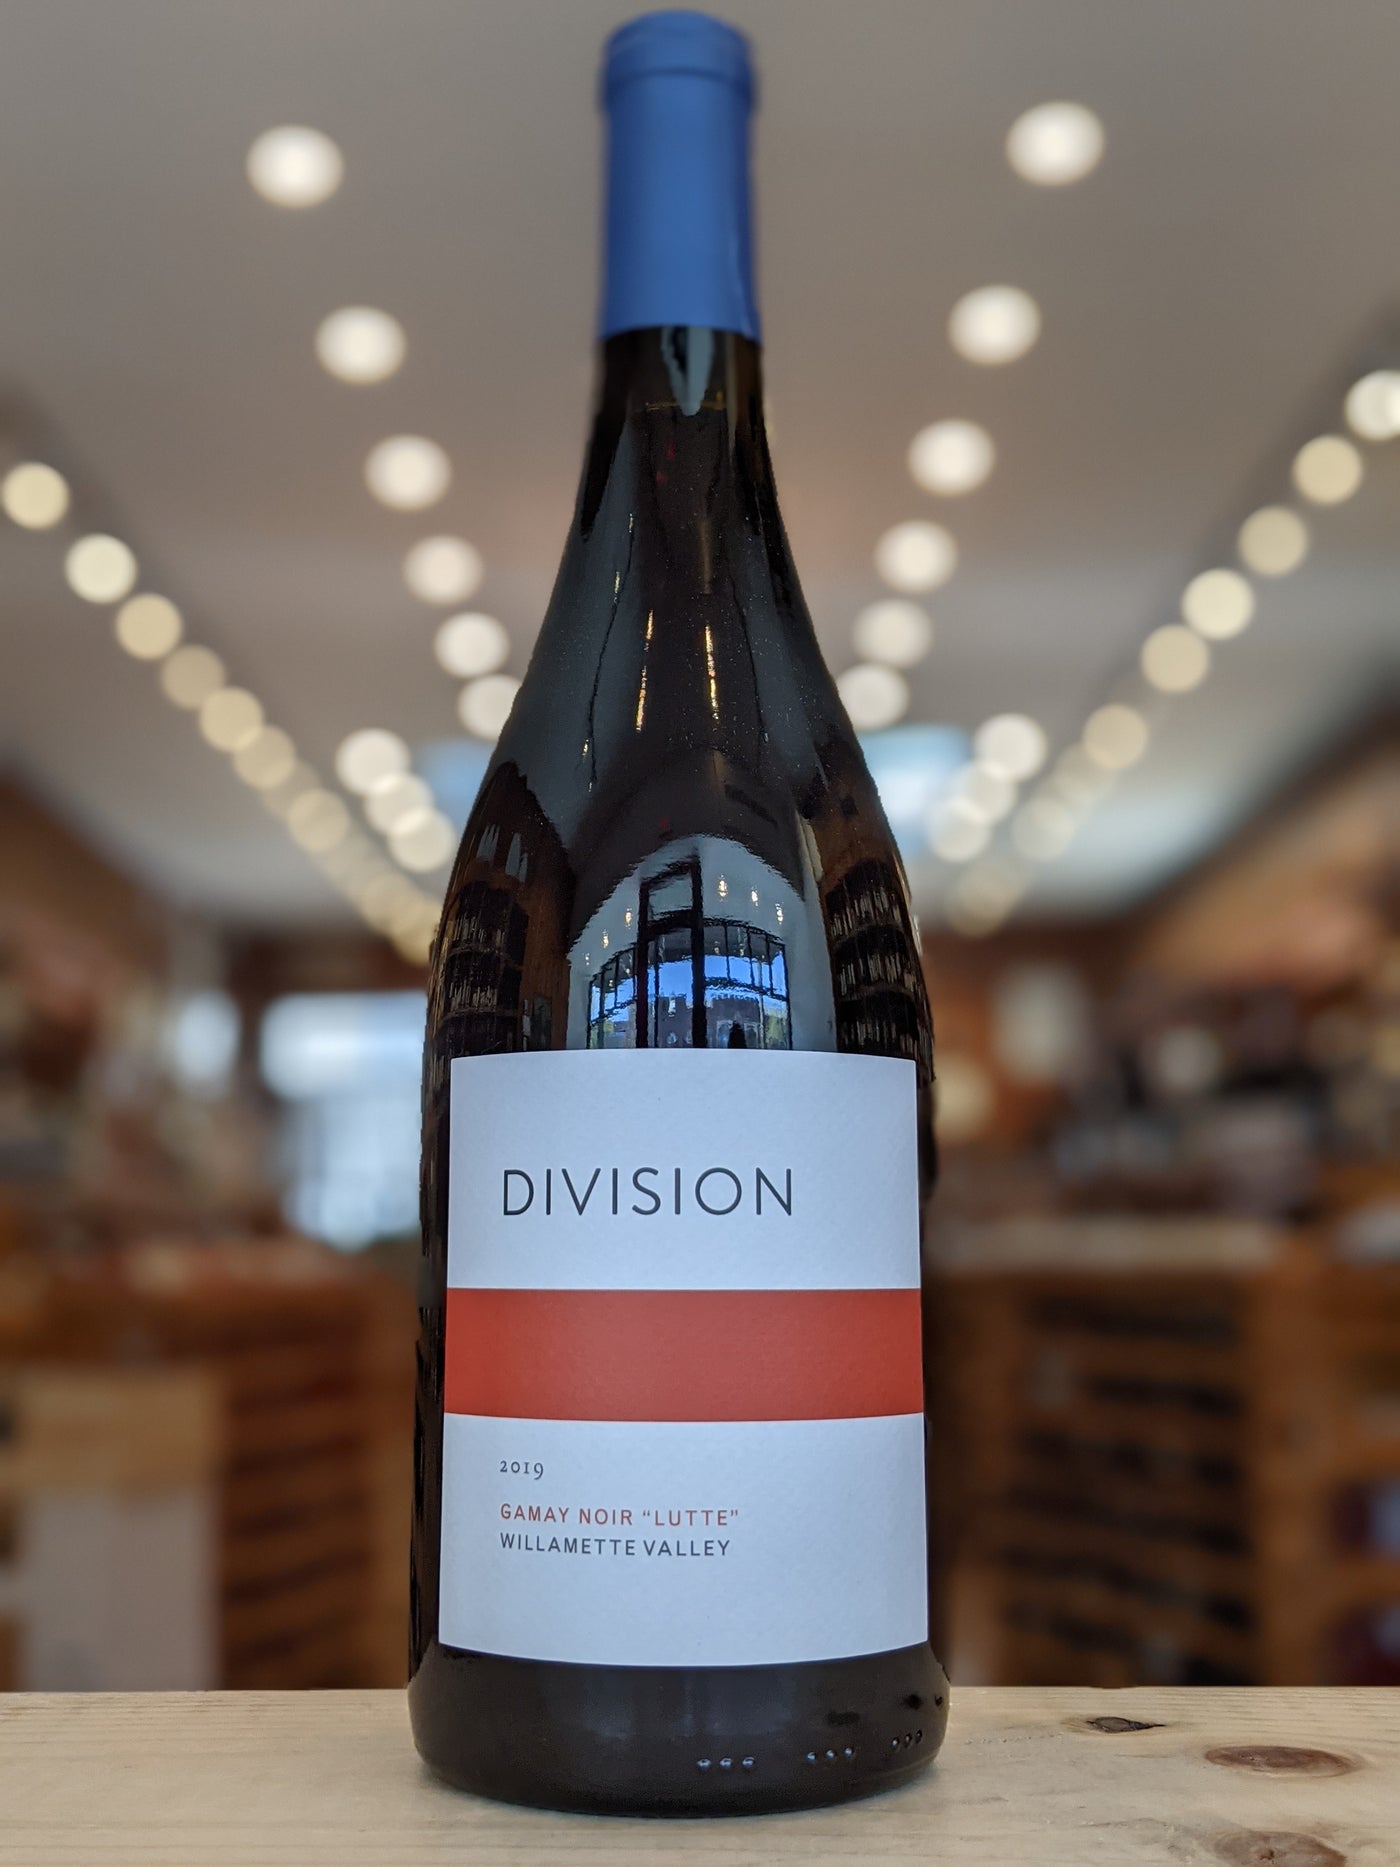 Division Willamette Valley Gamay Noir "Lutte" 2019